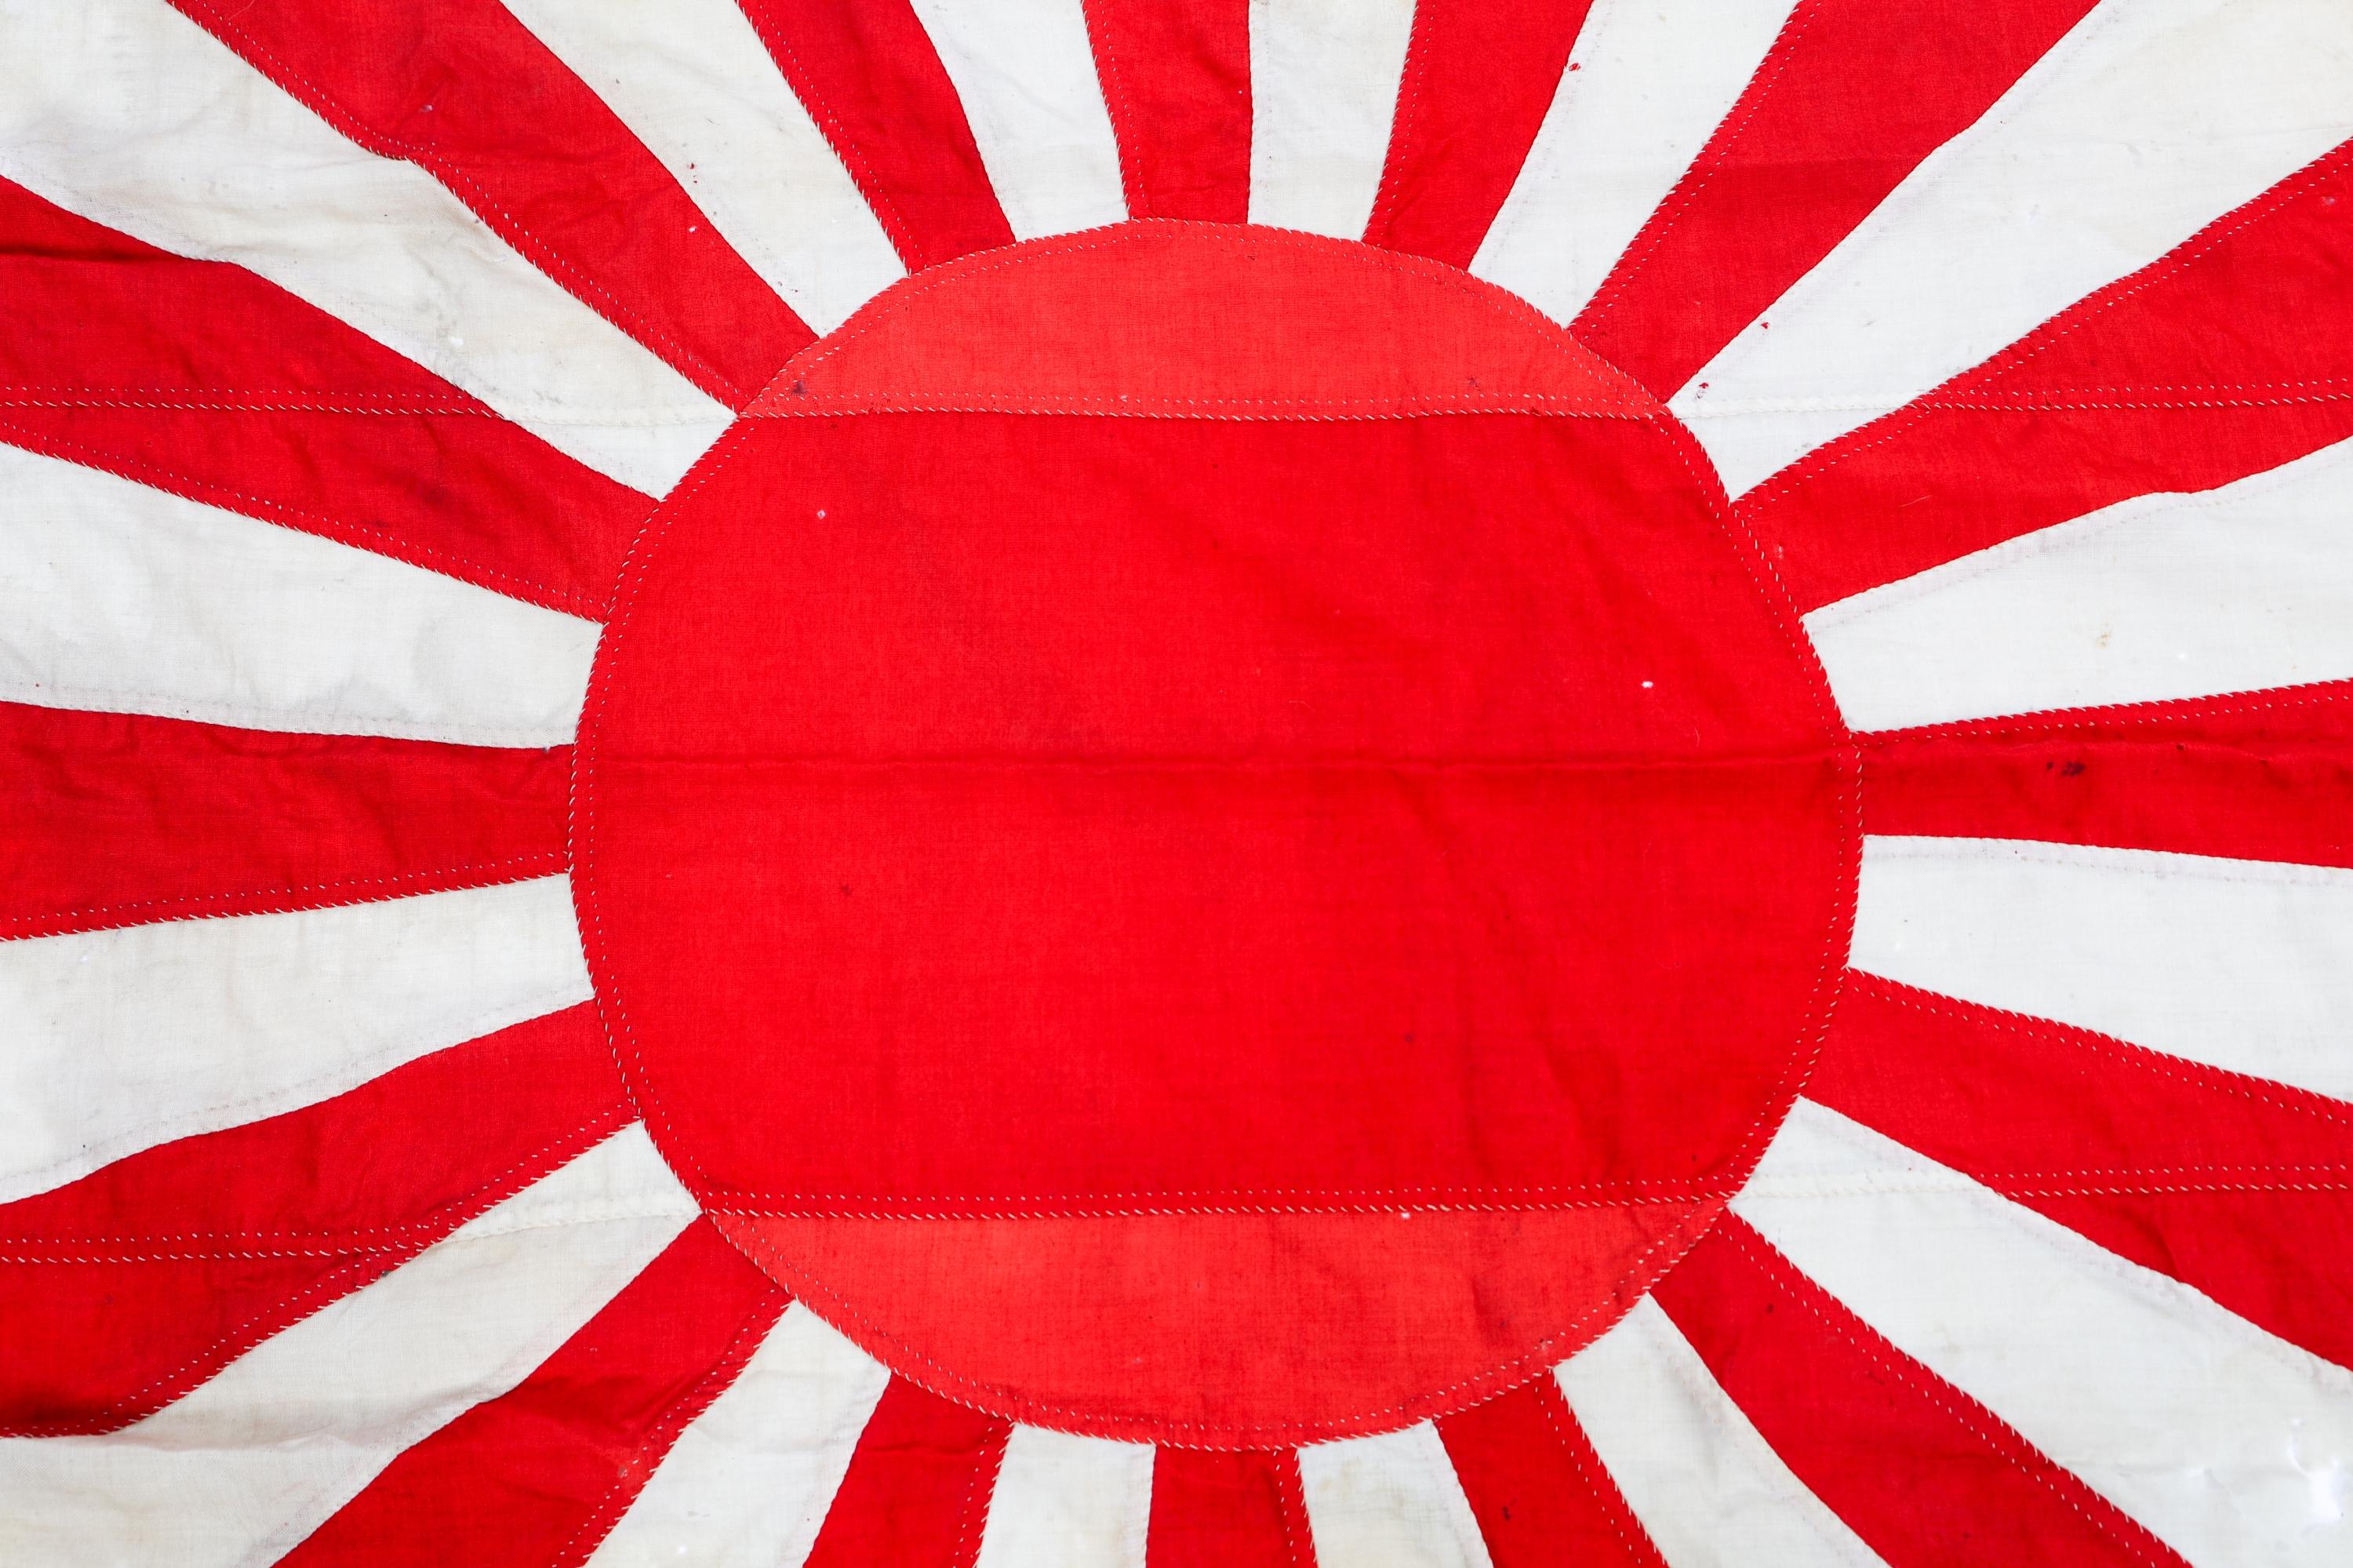 WWII IMPERIAL JAPANESE NAVY RISING SUN FLAG